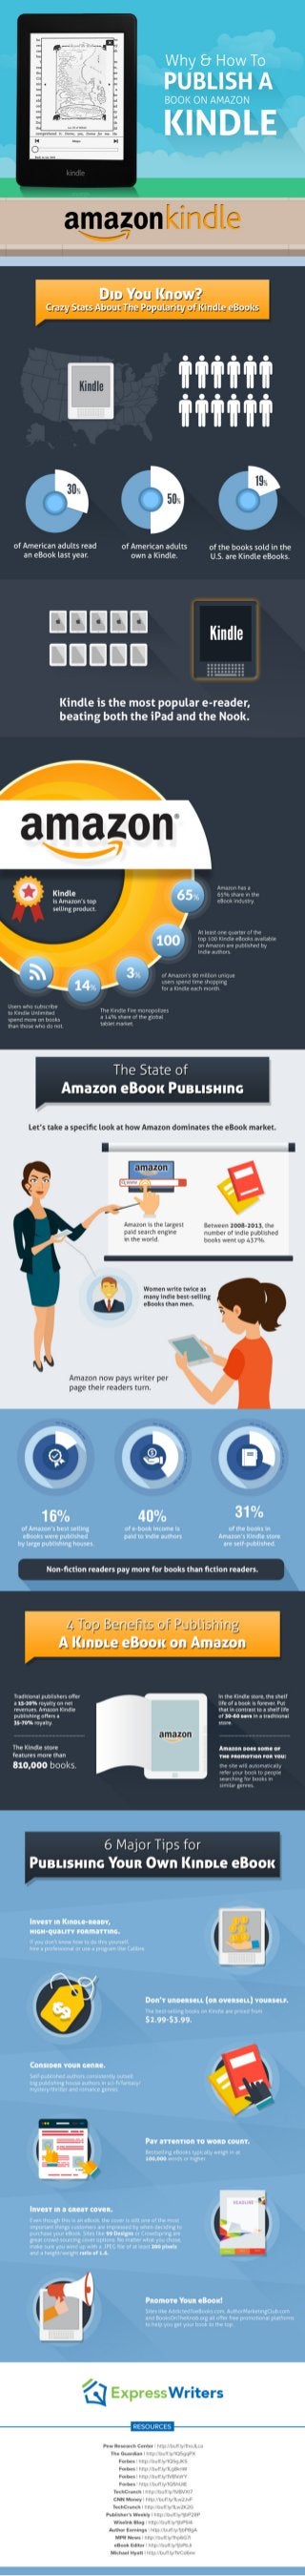 How To Get Published On Amazon Kindle infographic